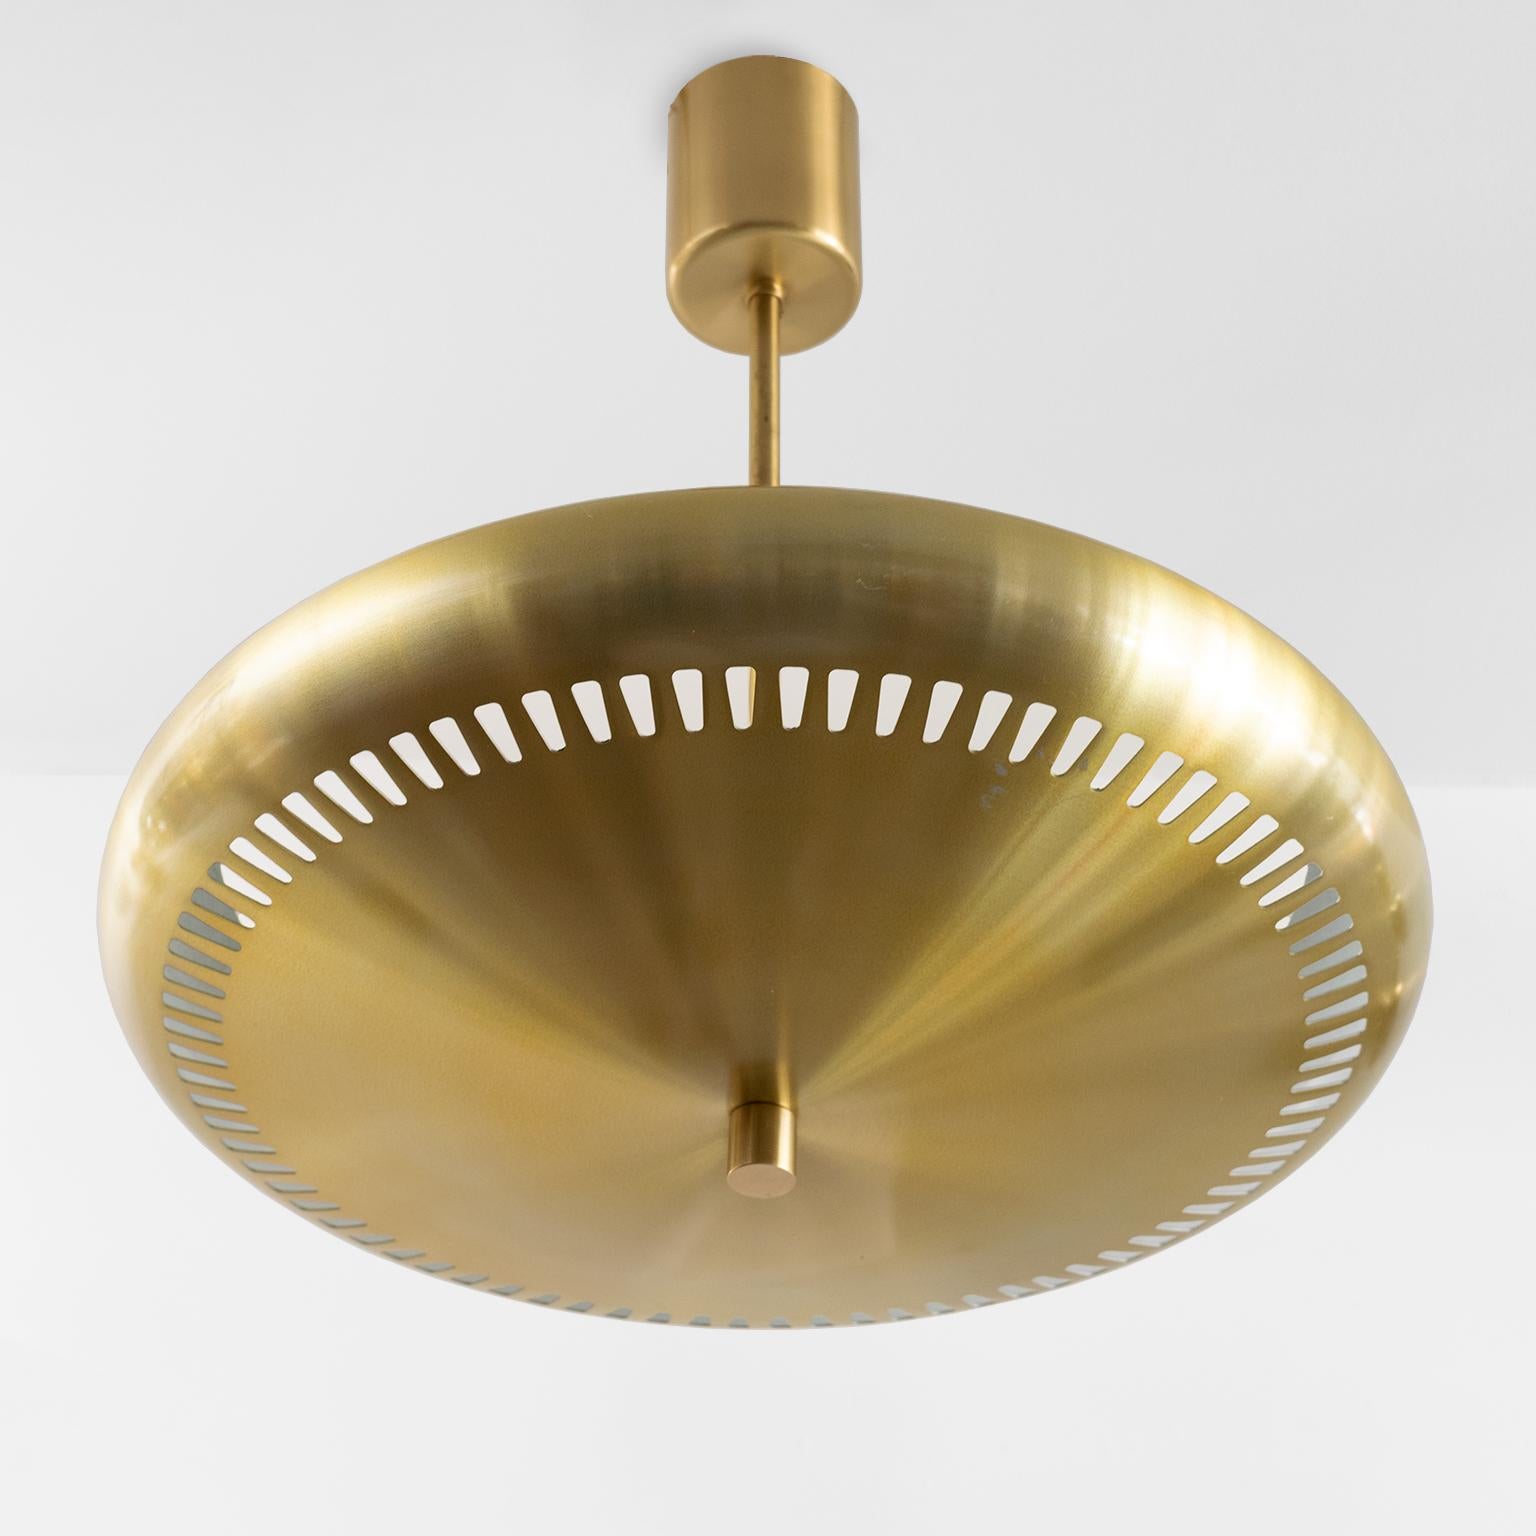 One of two available Scandinavian Modern uplight pendants designed by Hans-Agne Jakobsson for Luxus, Sweden. The fixture’s shade is made from lightweight aluminum and is plated in brass, the stem, canopy and finial are all brass. Newly rewired with